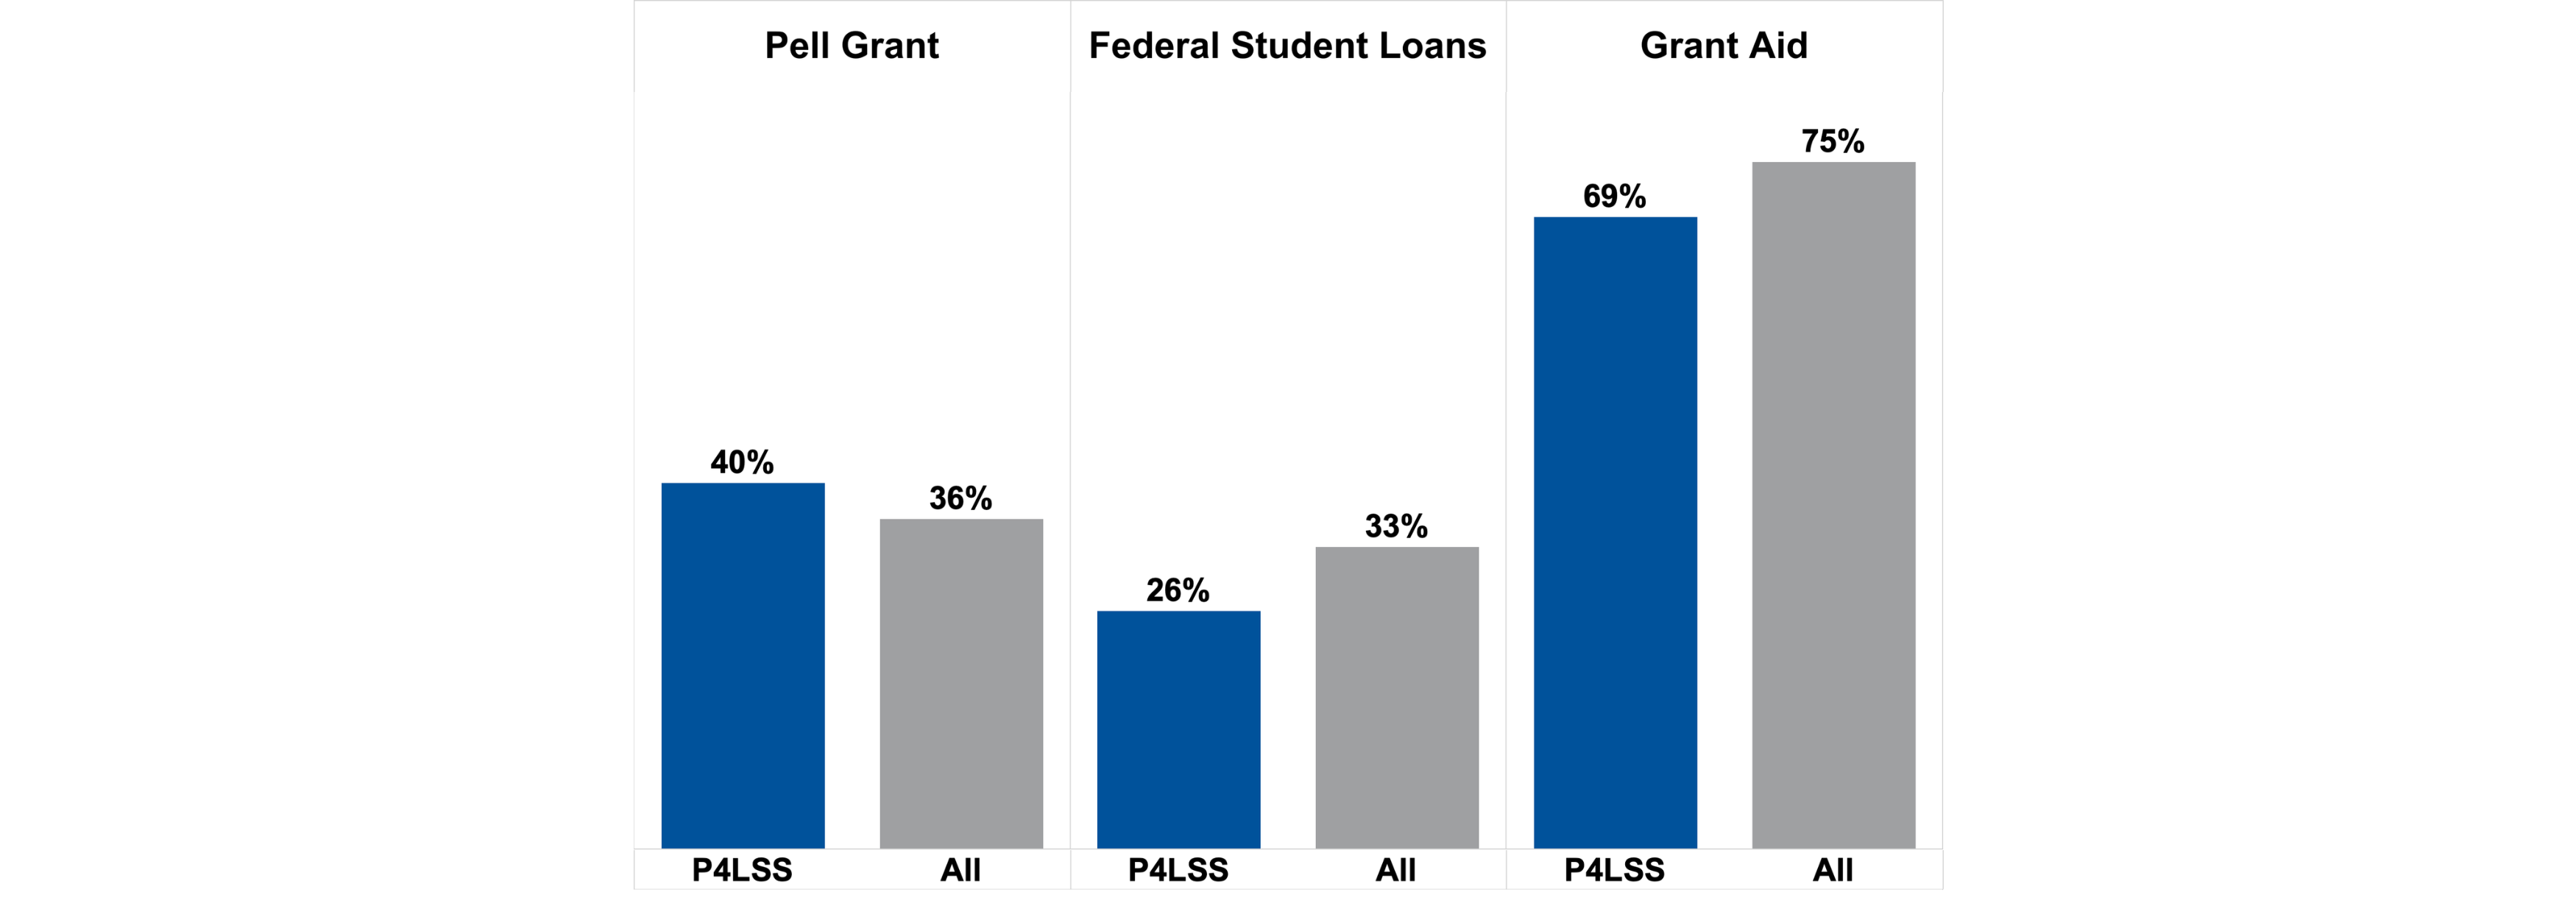 Bar graph representing About 40% of students received Pell Grants compared to 36% of students nationally, 26% received federal loans compared to 33% nationally, and 69% received total grant aid compared to 75% nationally. 